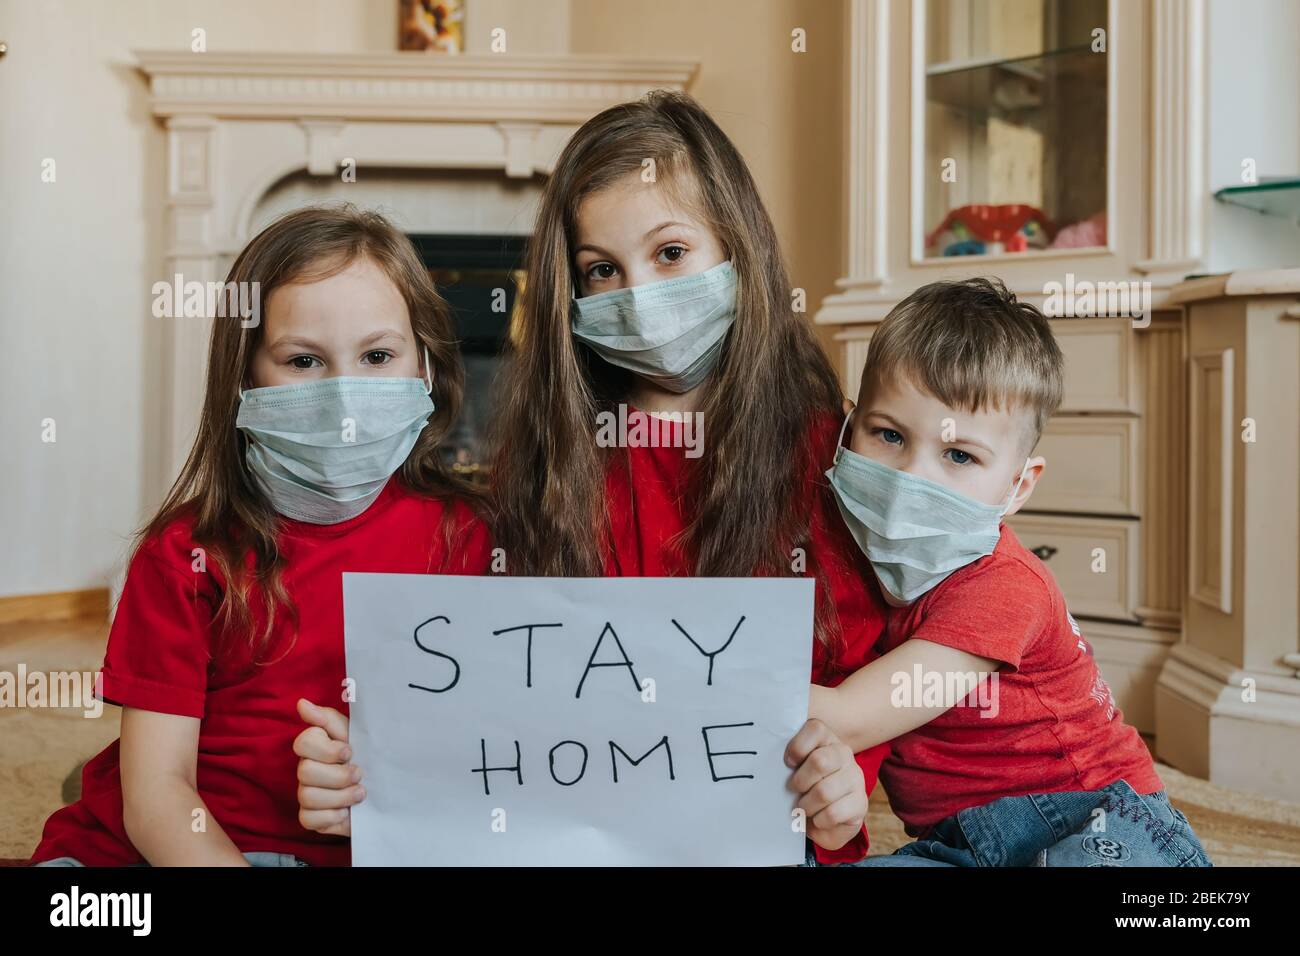 Family stay at home concept. Three children in mask holding sign saying stay at home for virus protection and take care of their health from COVID-19 Stock Photo